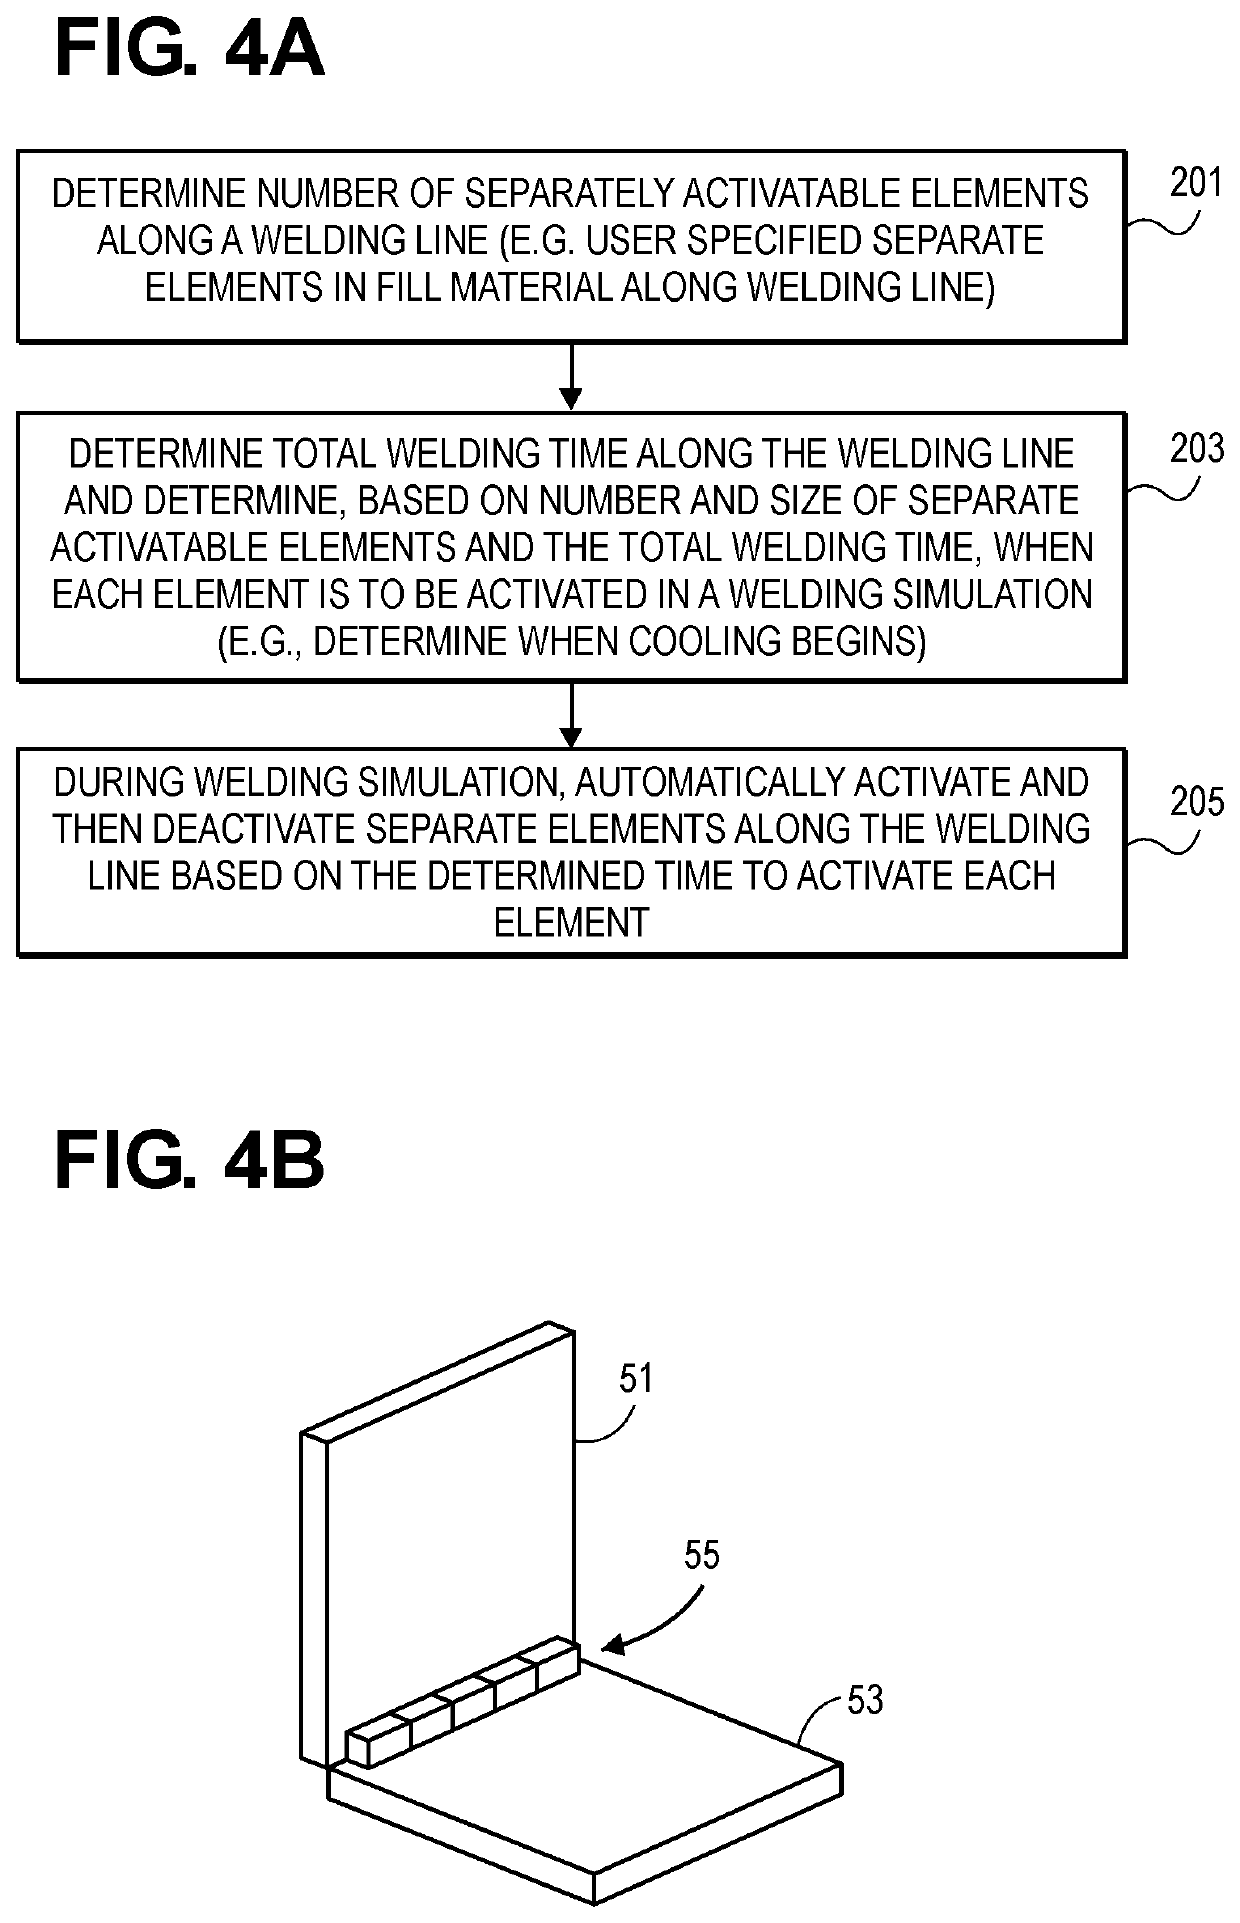 Methods for simulating welding processes that can use filler material